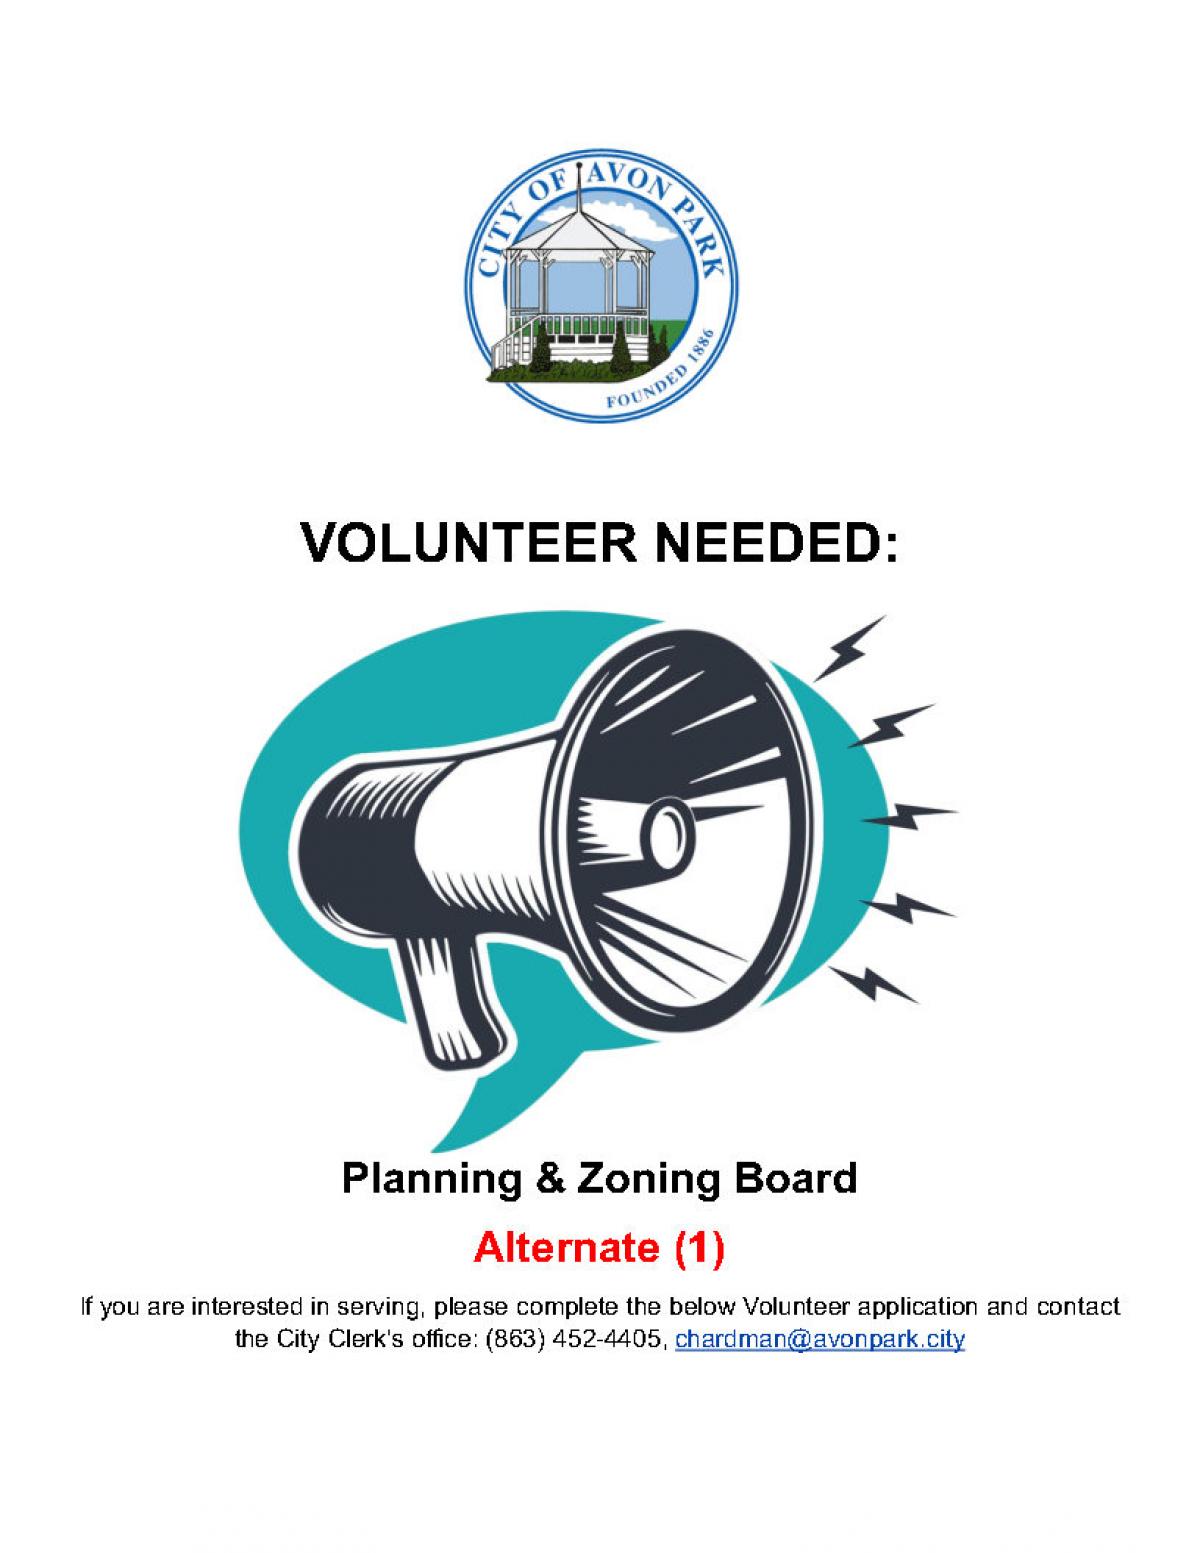 Image of megaphone and city logo, Advertisement for a vacancy on the P & Z board for Alternate